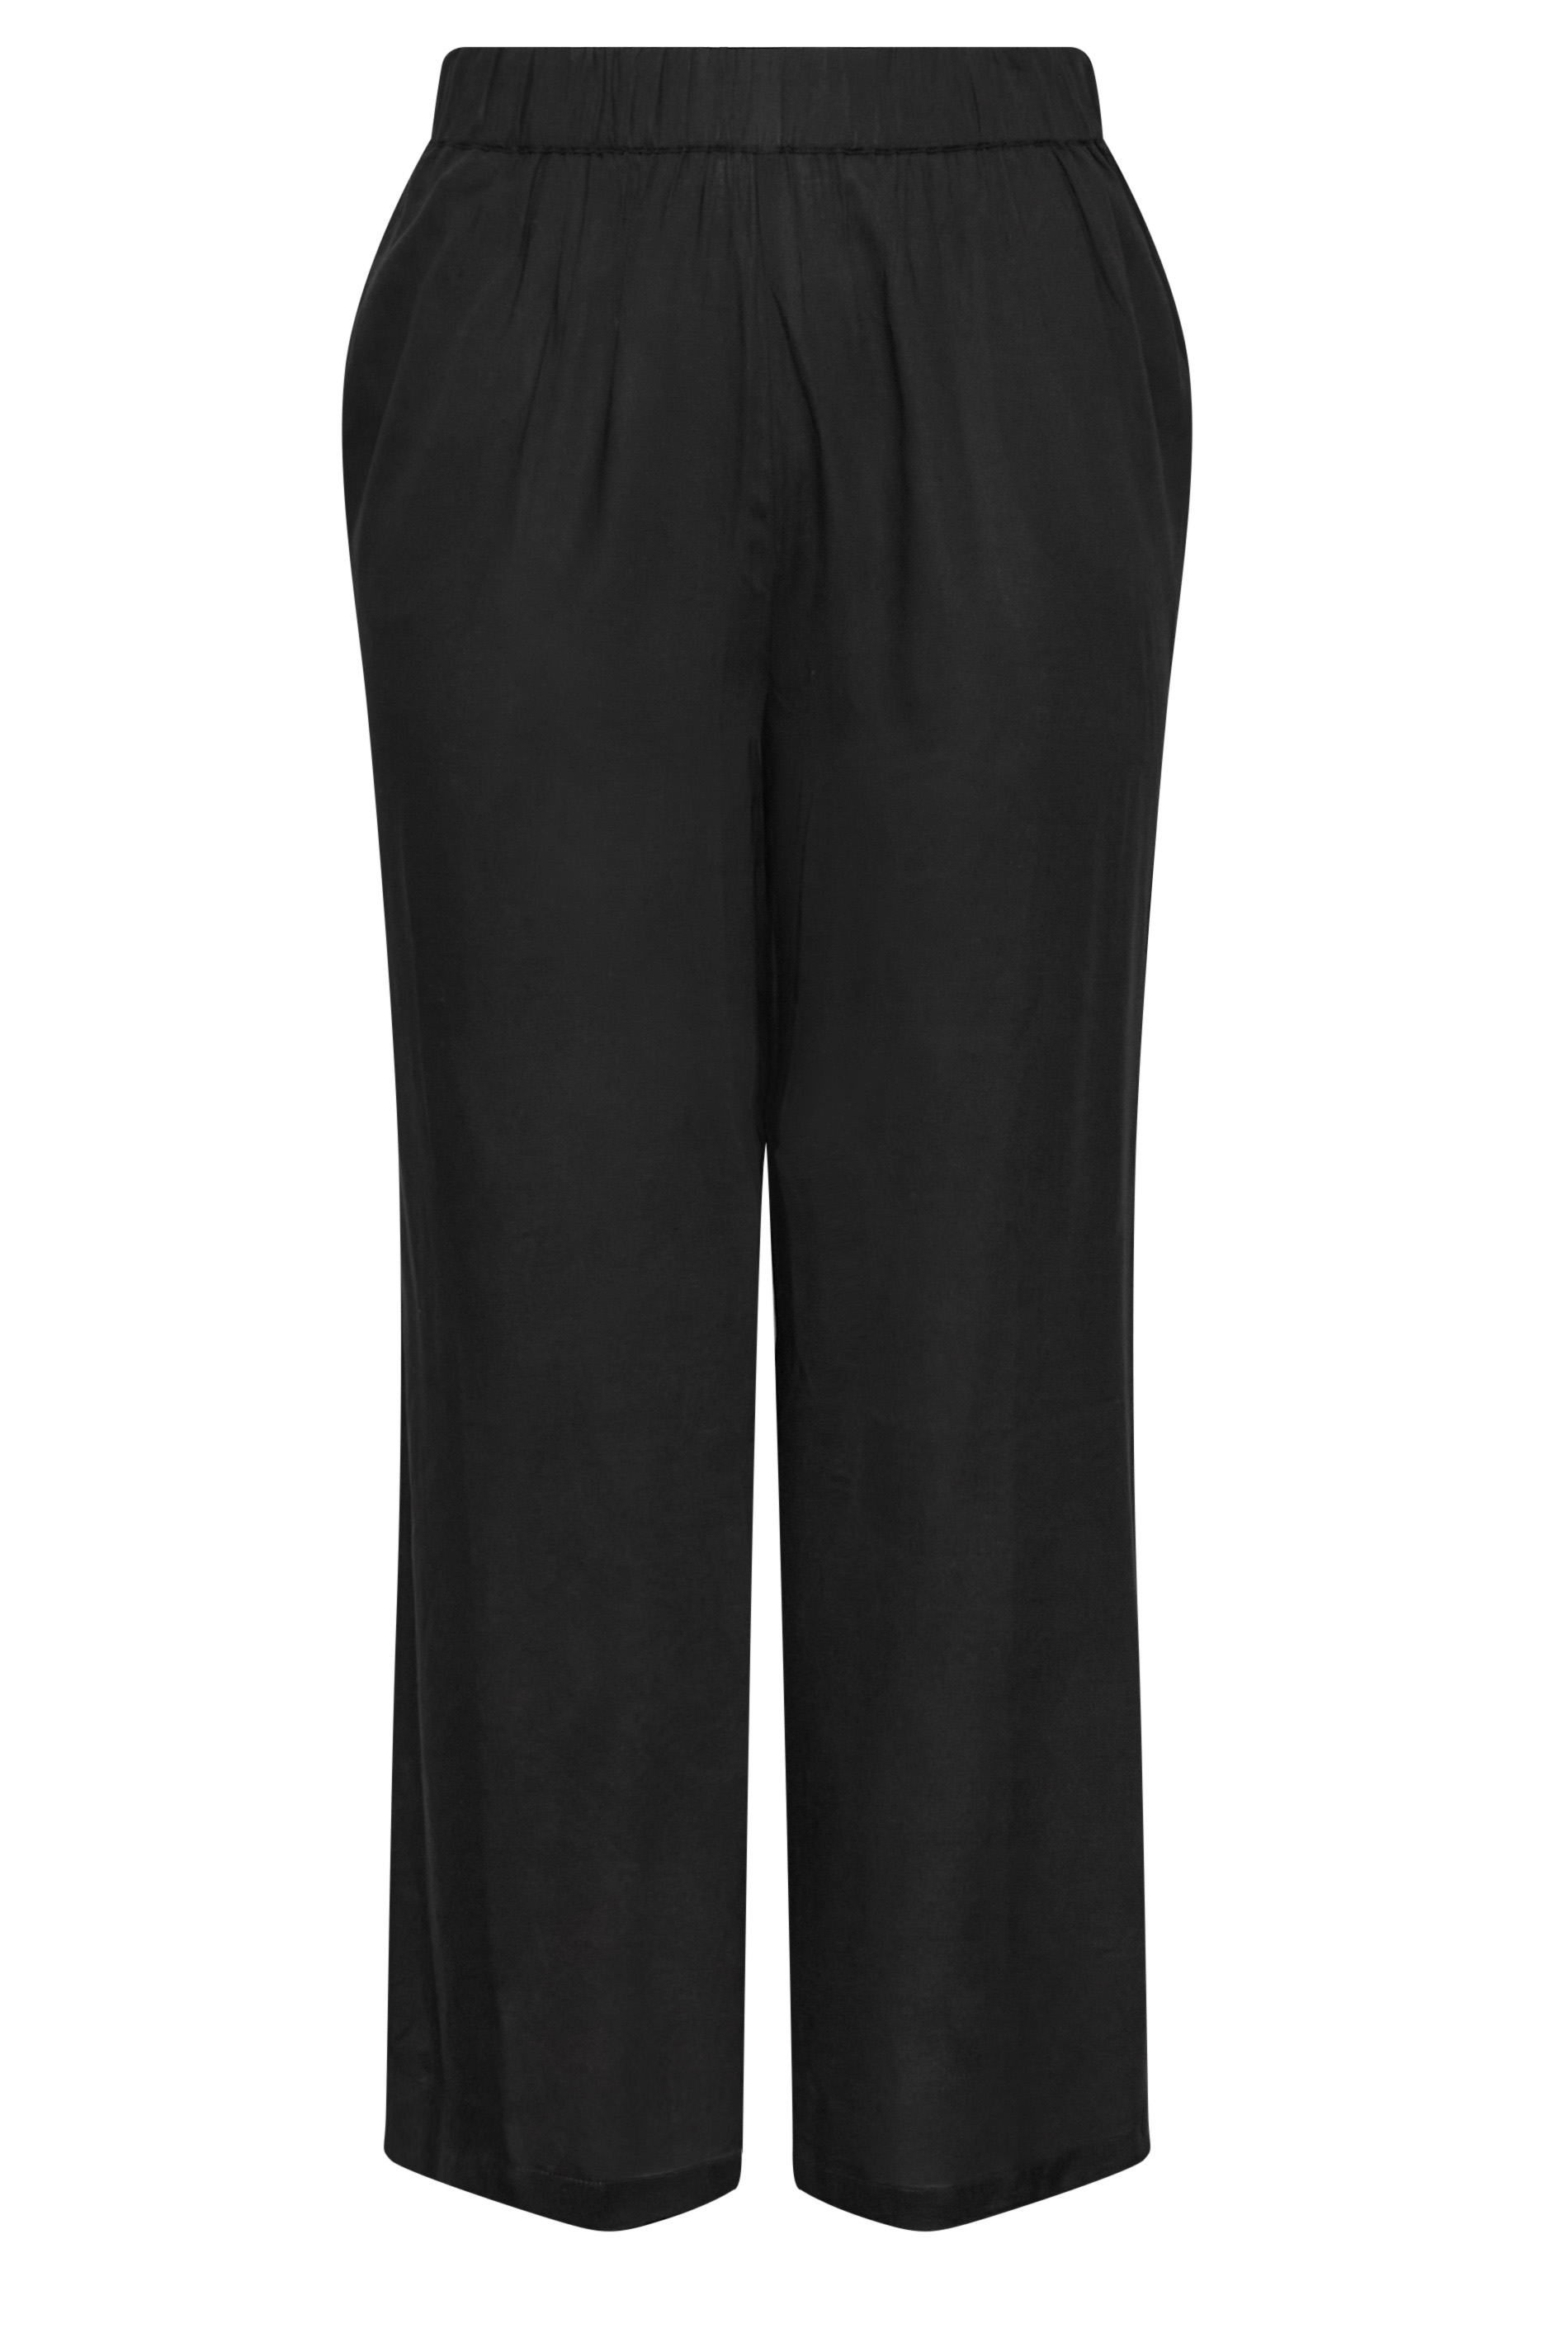 YOURS Plus Size Black Pull-On Wide Leg Trousers | Yours Clothing